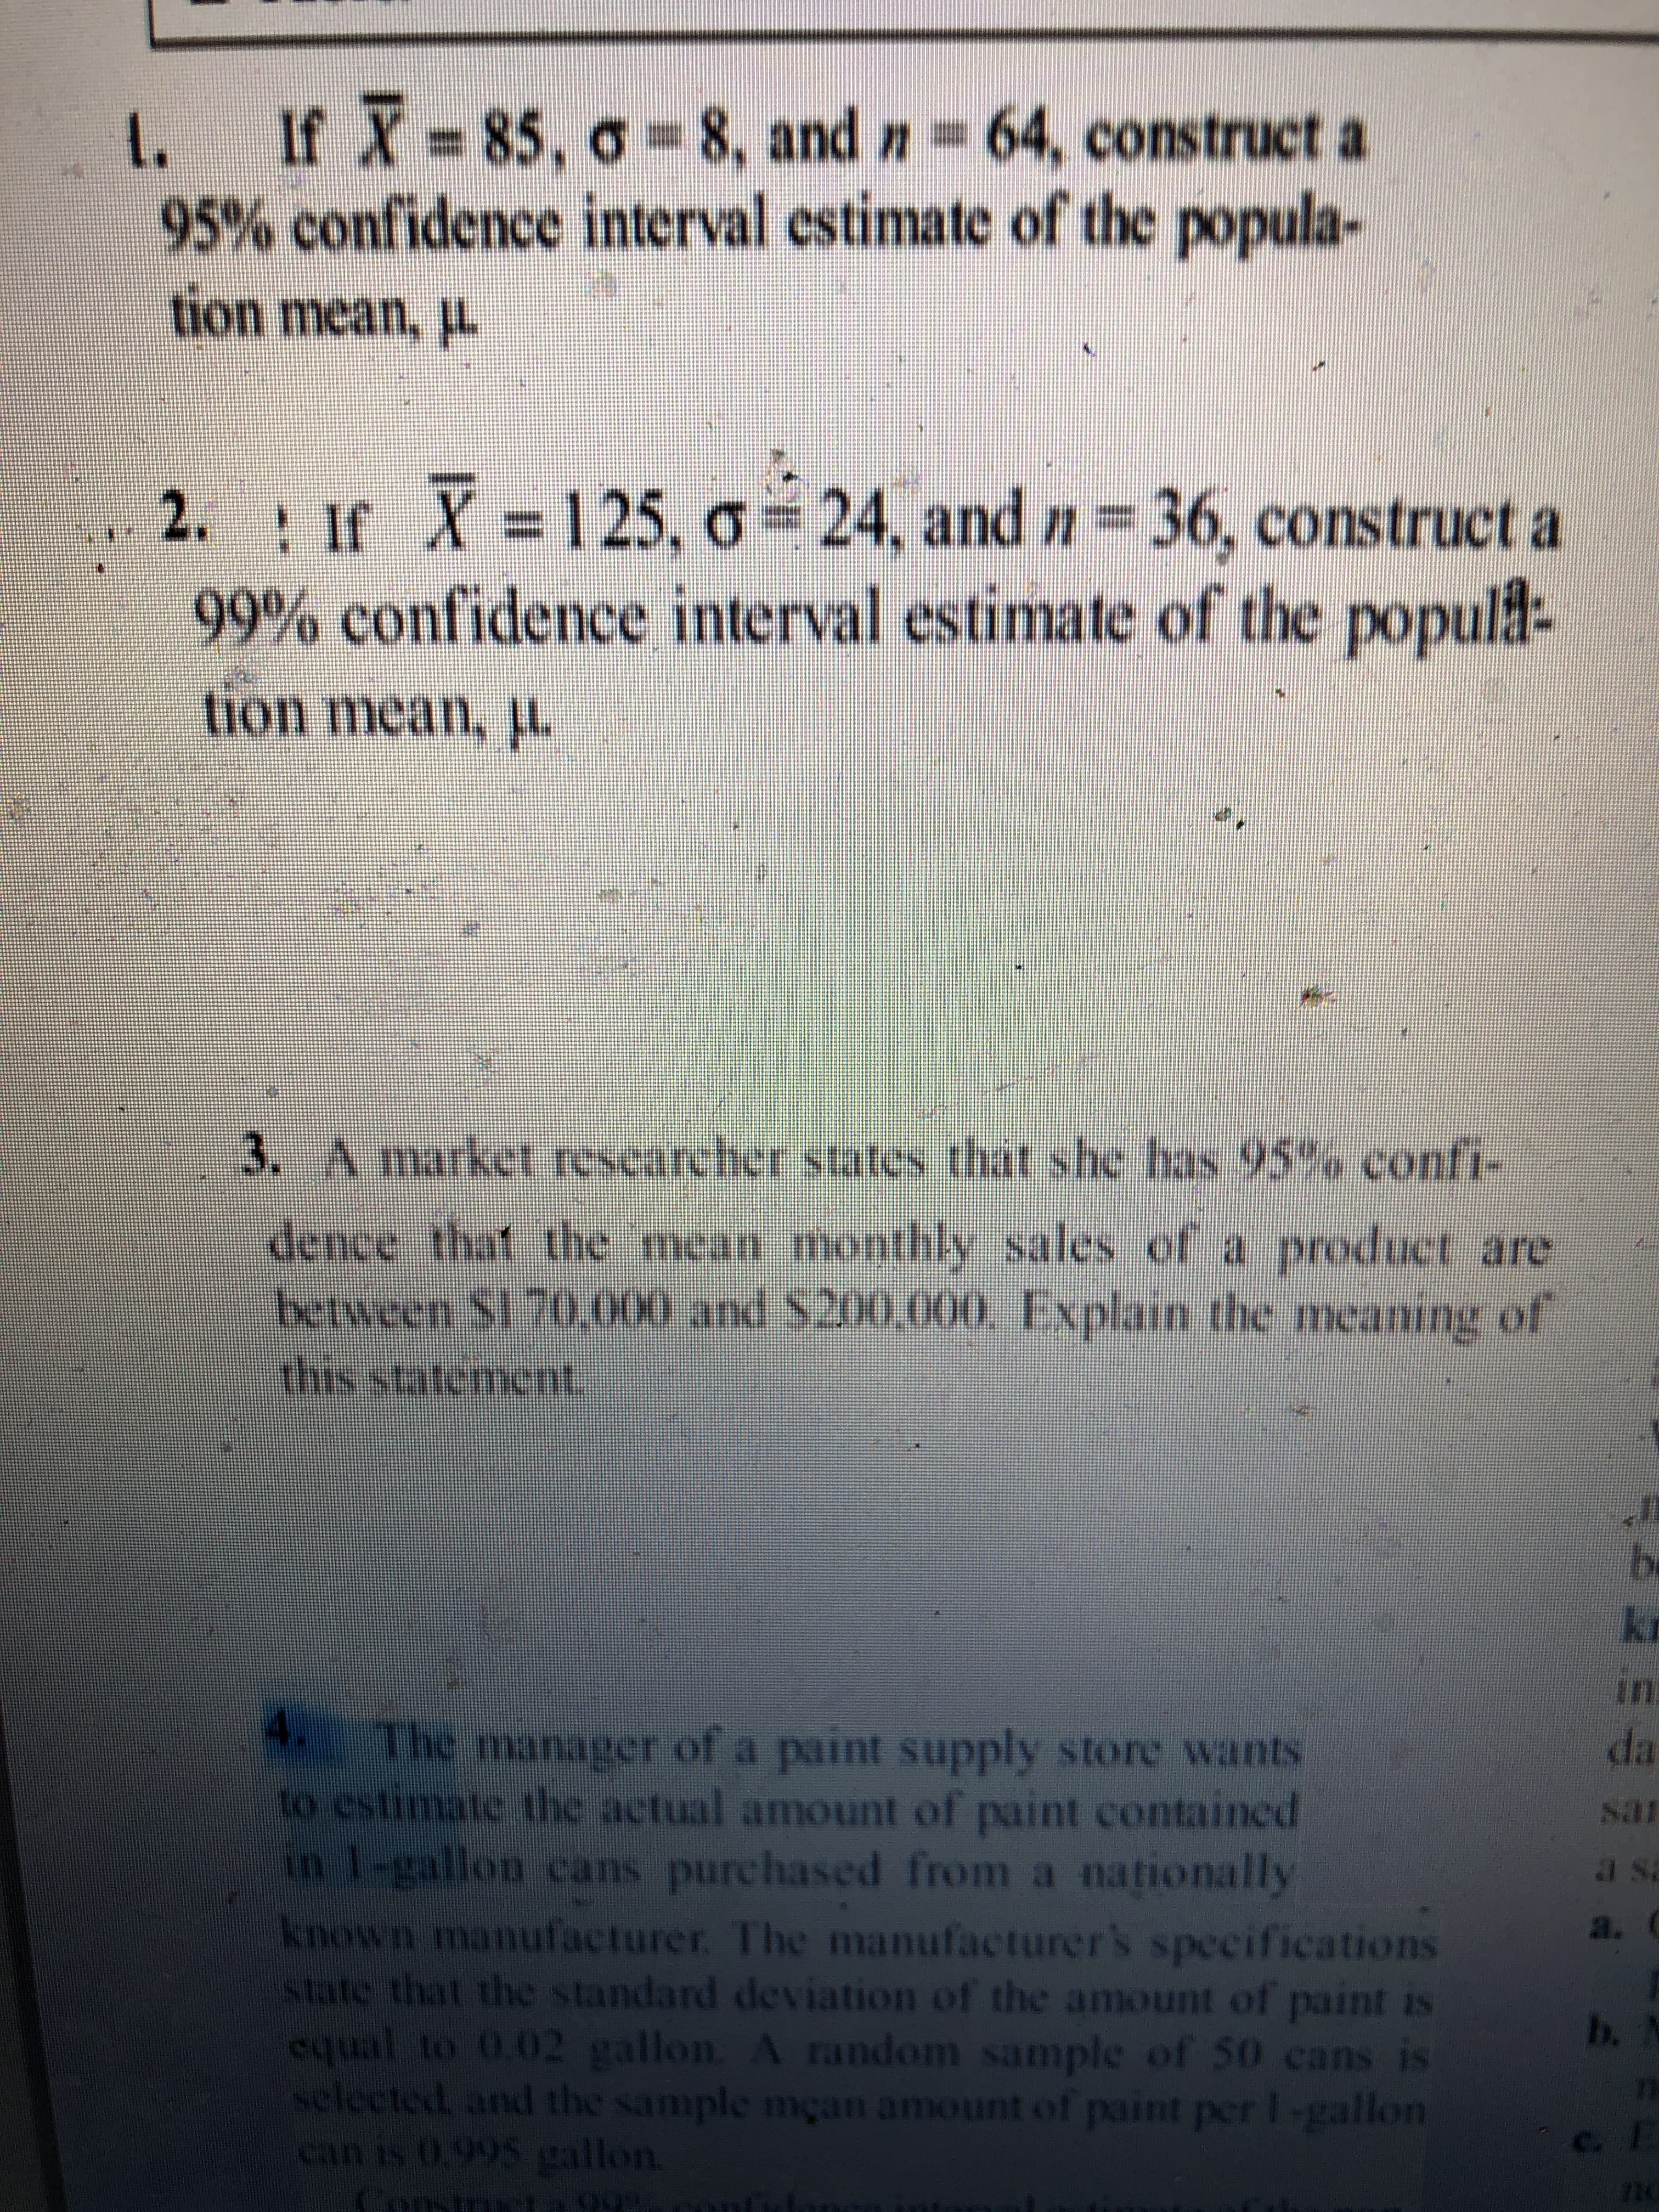 - 85, o=8, and n 64, construct a
idence interval estimate of the popula-
